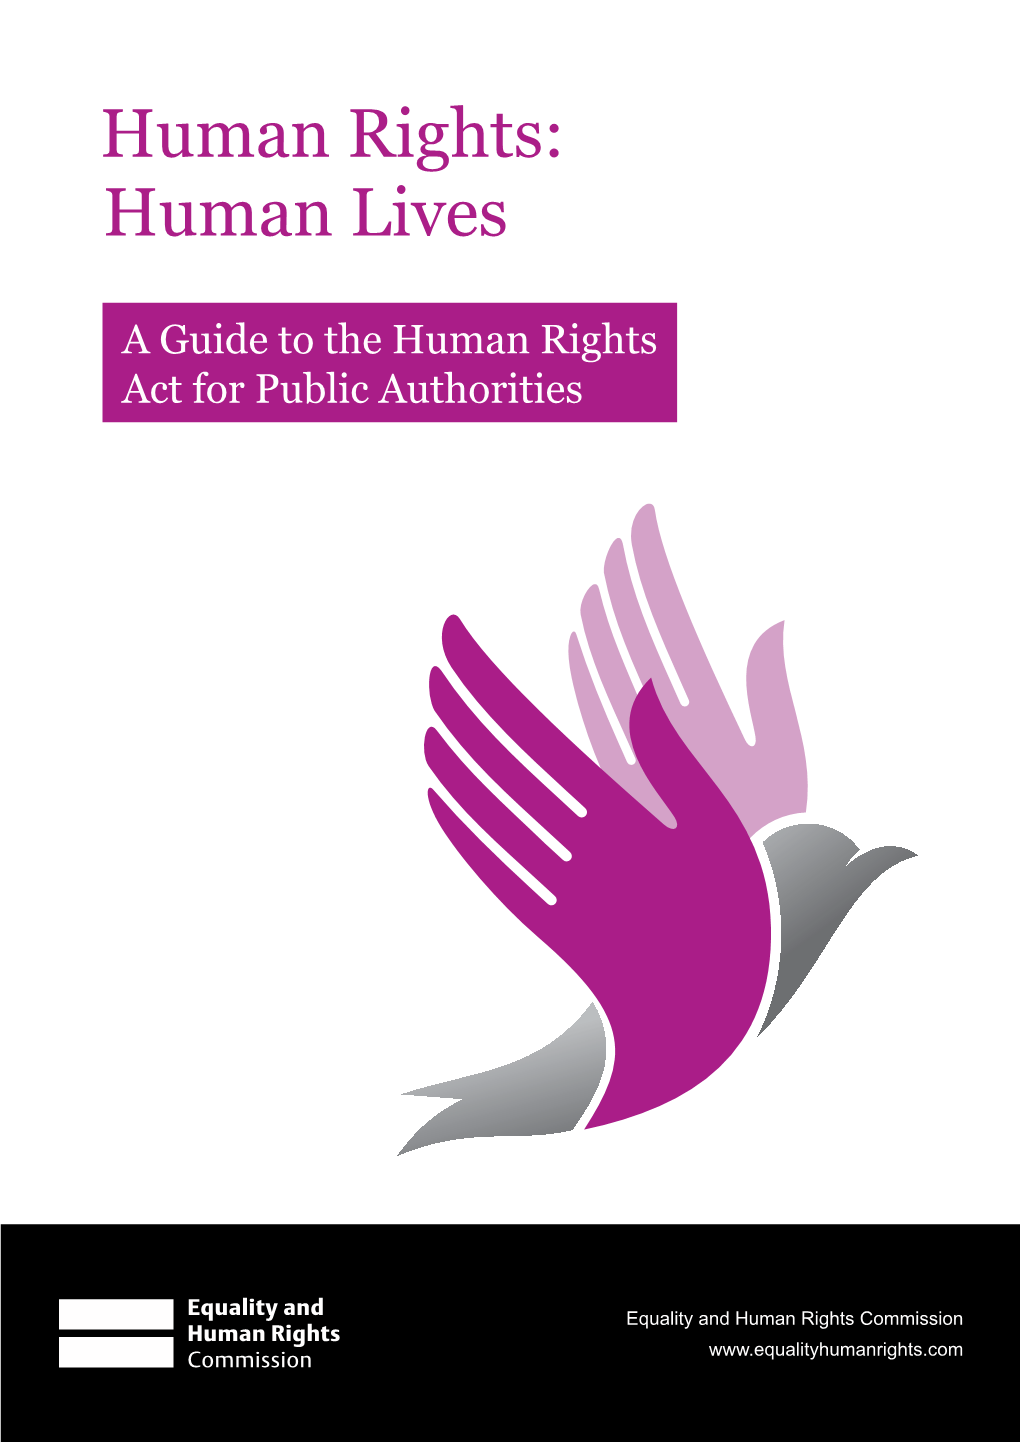 Human Lives. a Guide to the Human Rights Act for Public Authorities